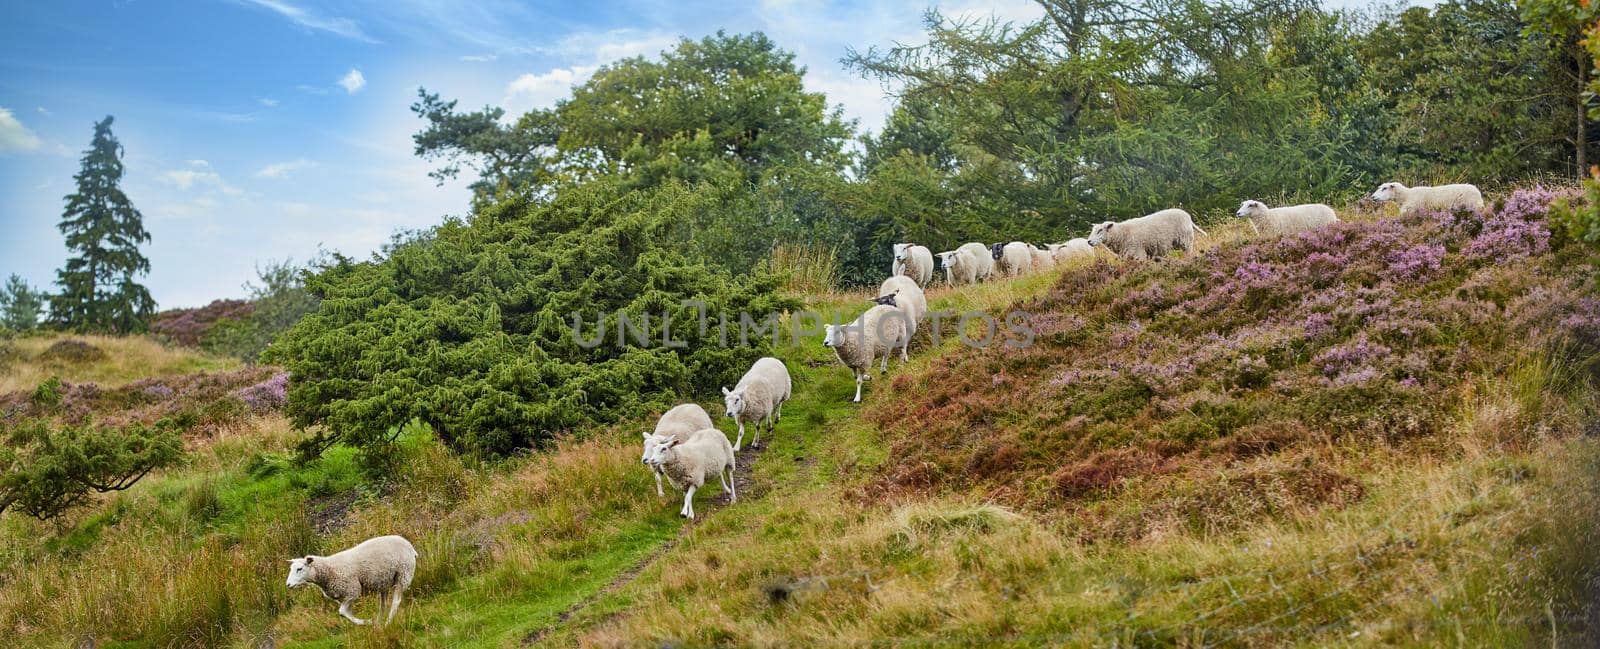 Flock of sheep walking and being herded together on a grazing farm pasture. Group of hairy, wool animals in remote countryside farmland and agriculture estate. Raising livestock for clothing industry by YuriArcurs